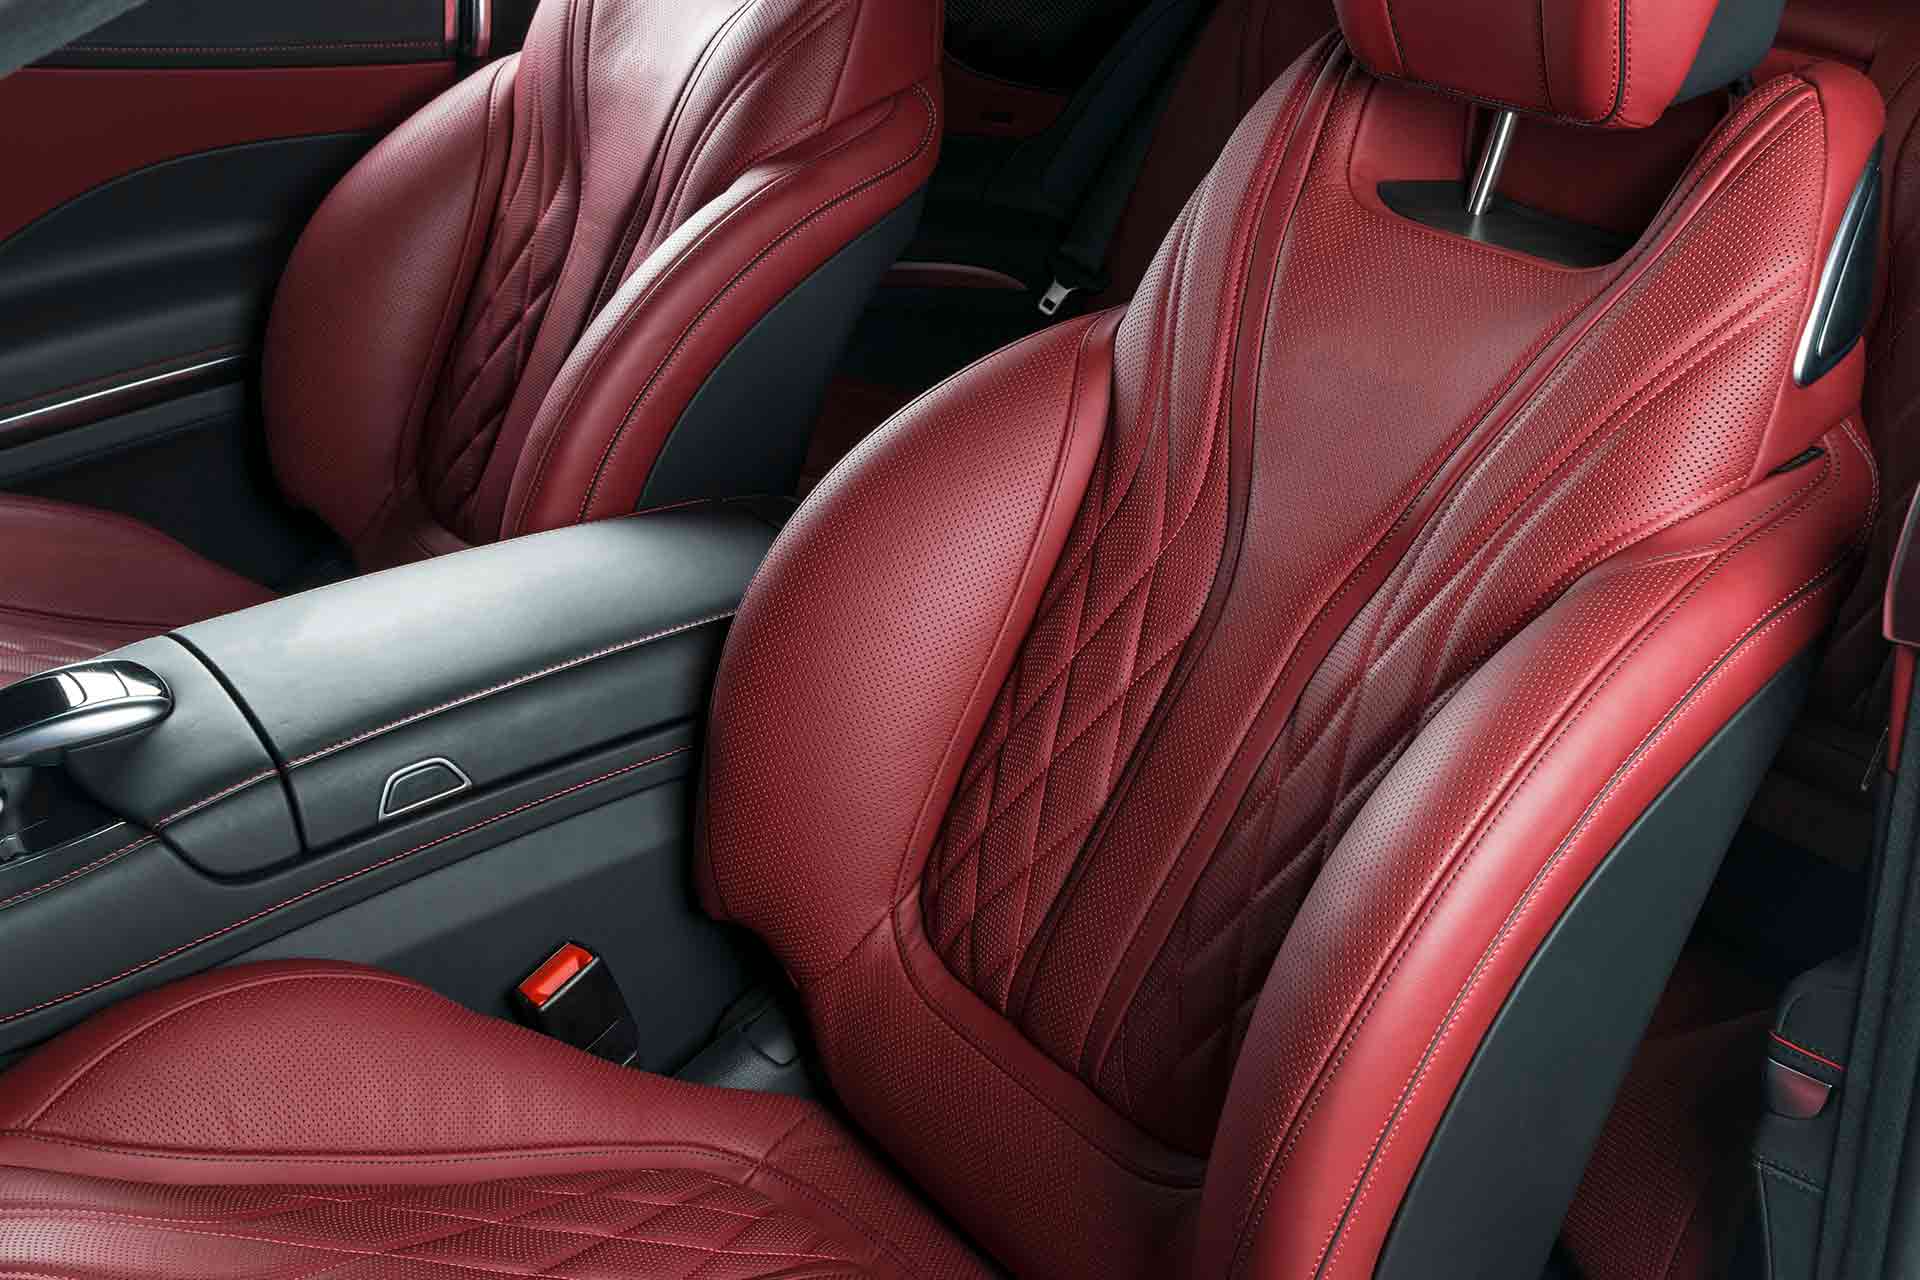 How do I clean car seats? Step-by-step guide to cleaning leather, fabric  and suede interiors